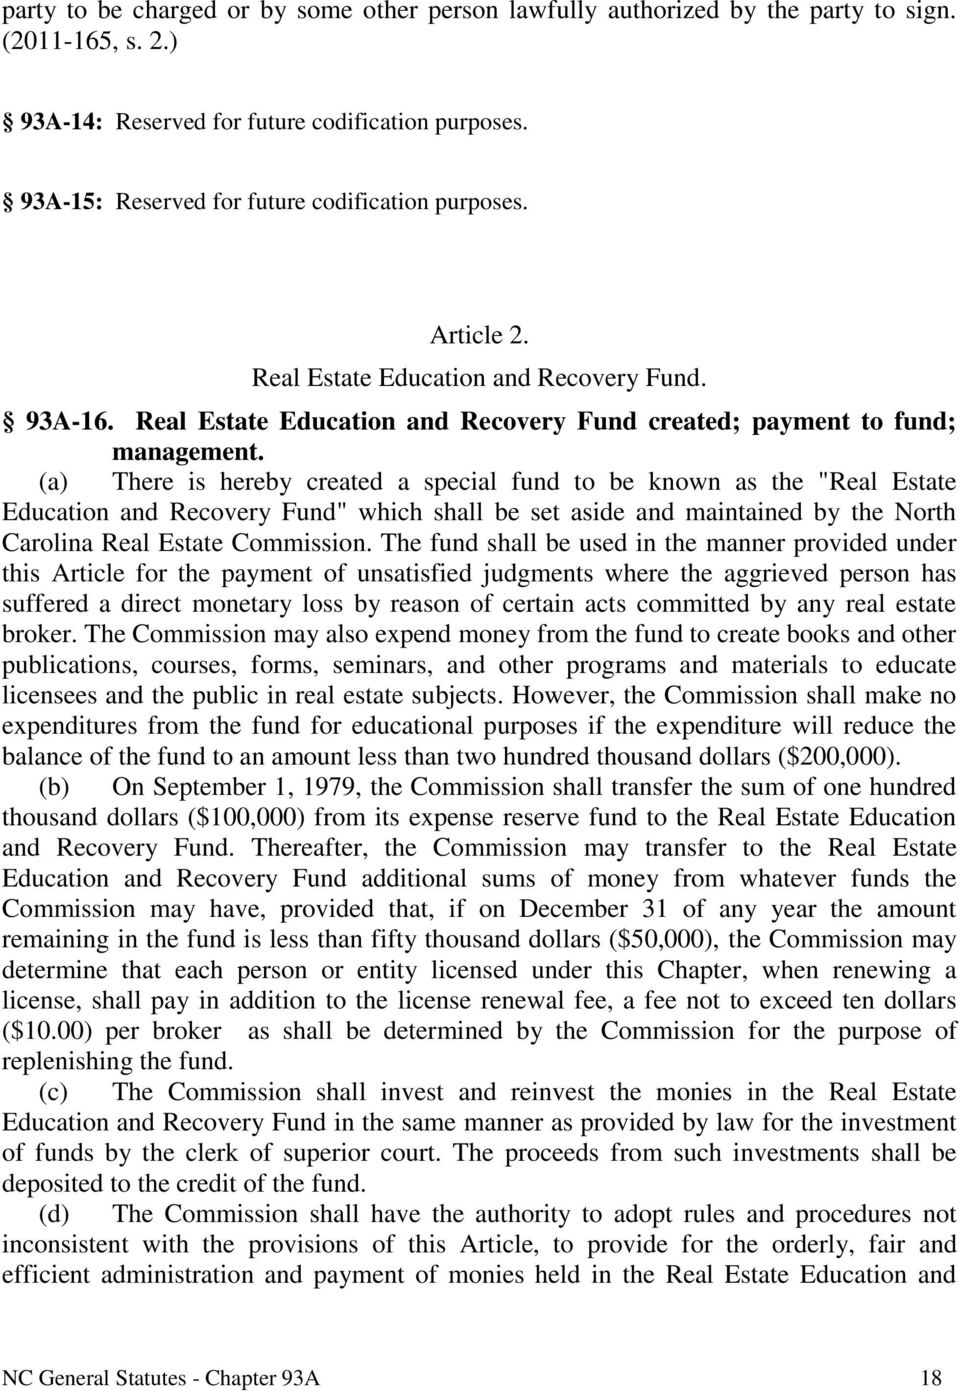 (a) There is hereby created a special fund to be known as the "Real Estate Education and Recovery Fund" which shall be set aside and maintained by the North Carolina Real Estate Commission.